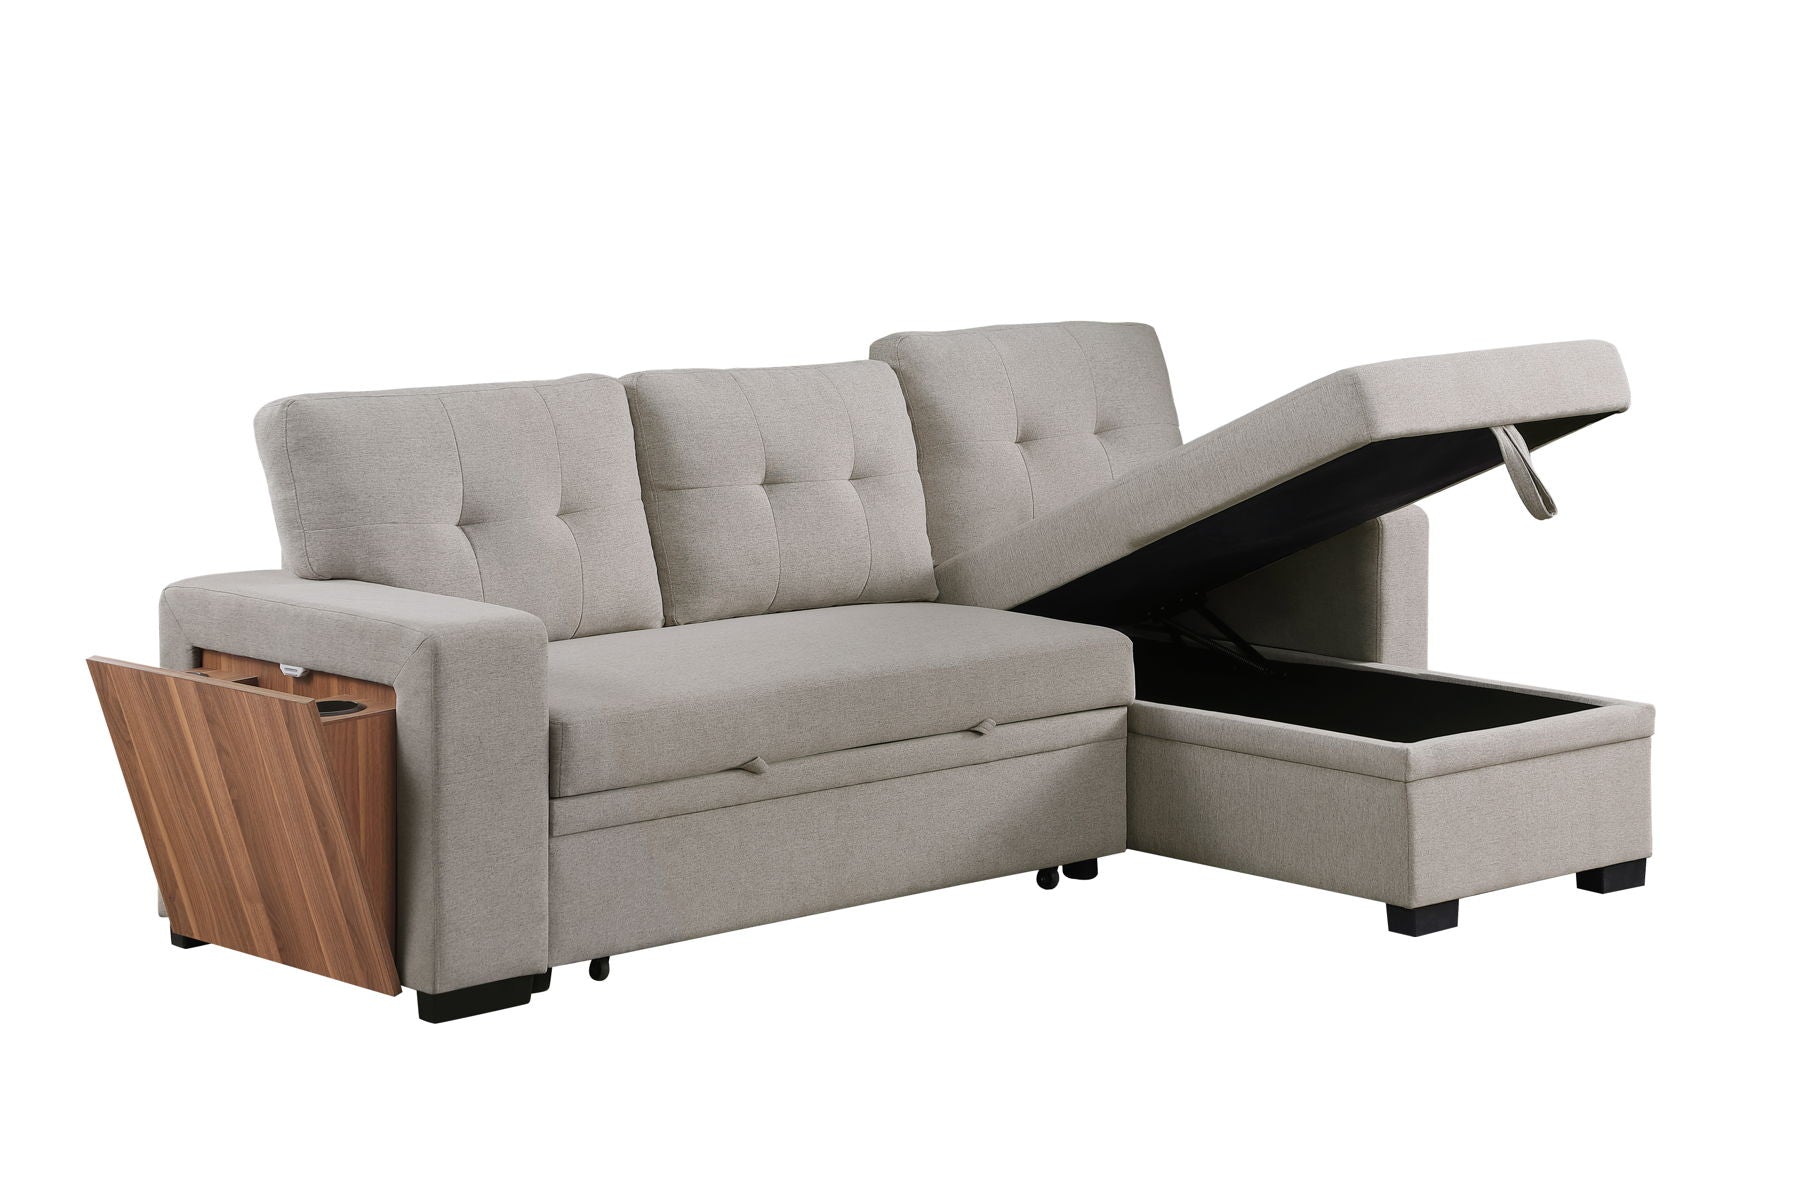 3 Piece Upholstered Sectional